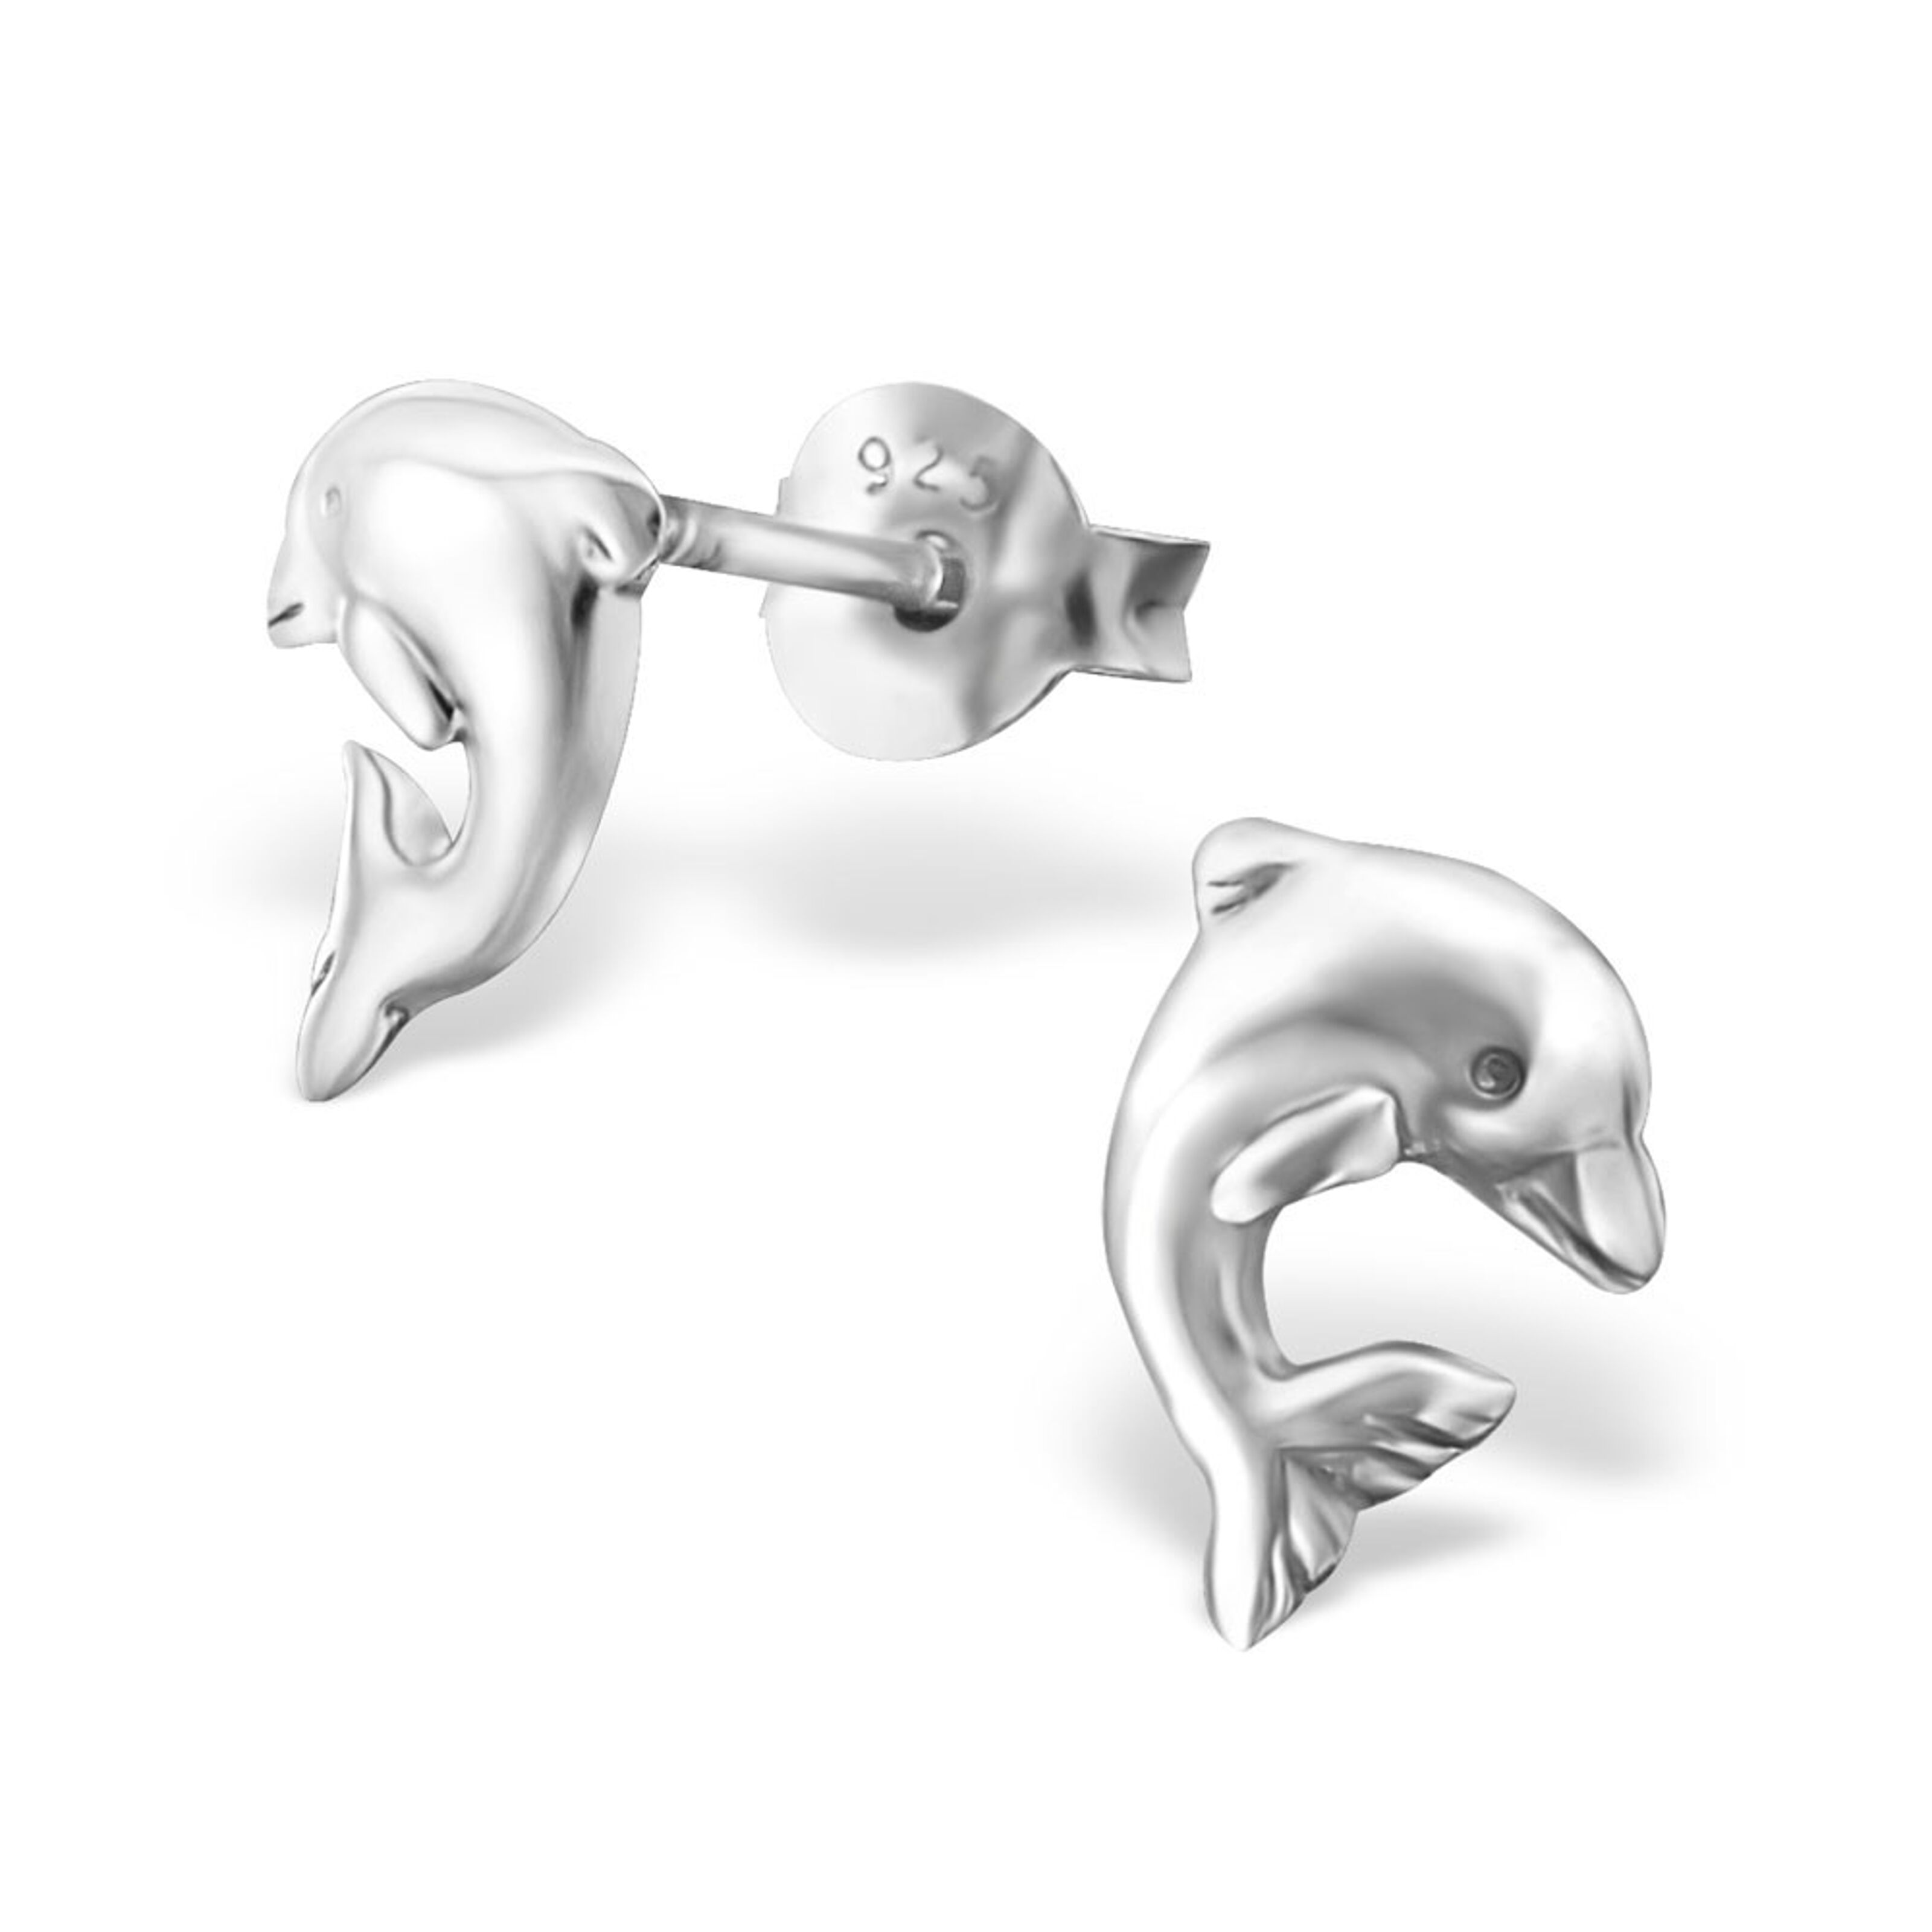 Buy wholesale Ear studs dolphin jumping 8 mm 925 silver